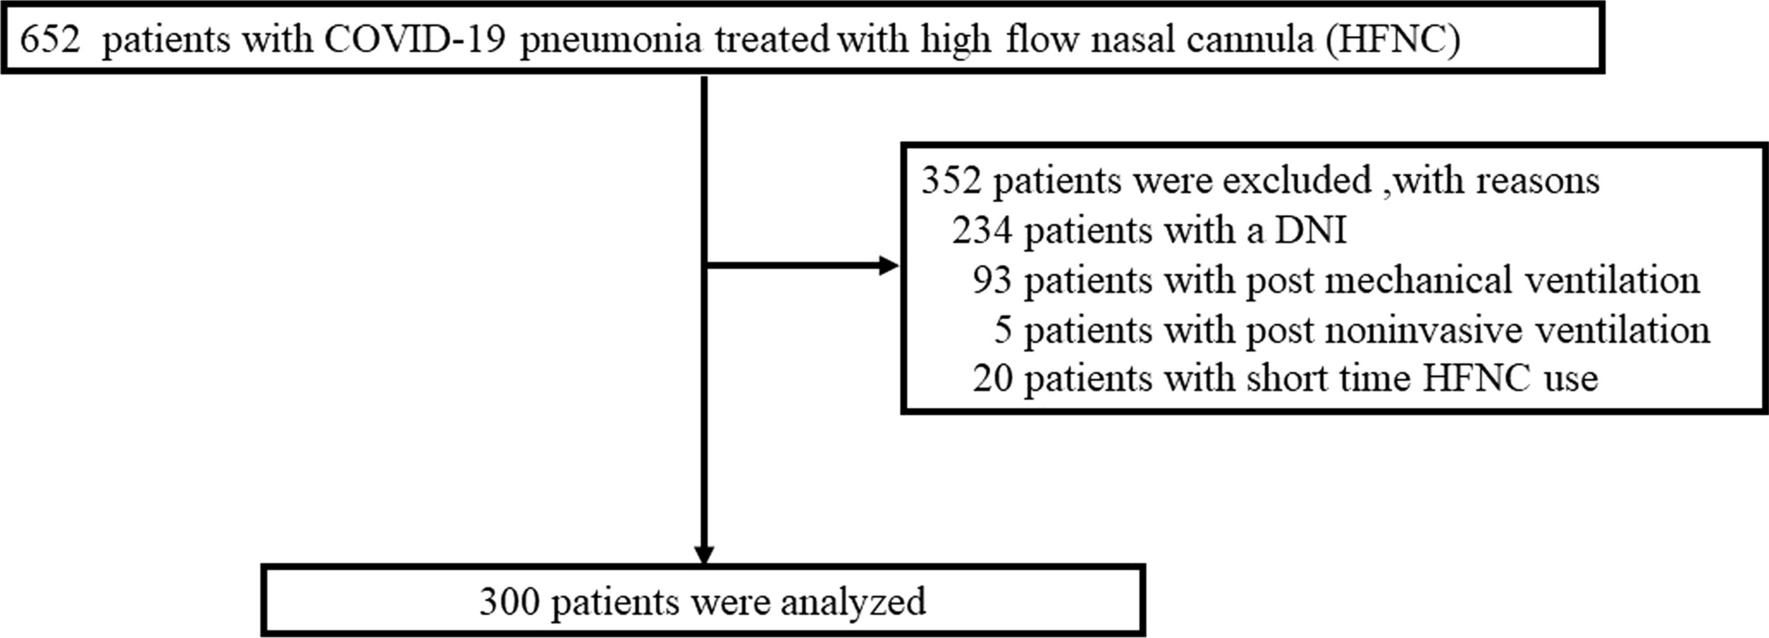 External validation of the HACOR score and ROX index for predicting treatment failure in patients with coronavirus disease 2019 pneumonia managed on high-flow nasal cannula therapy: a multicenter retrospective observational study in Japan